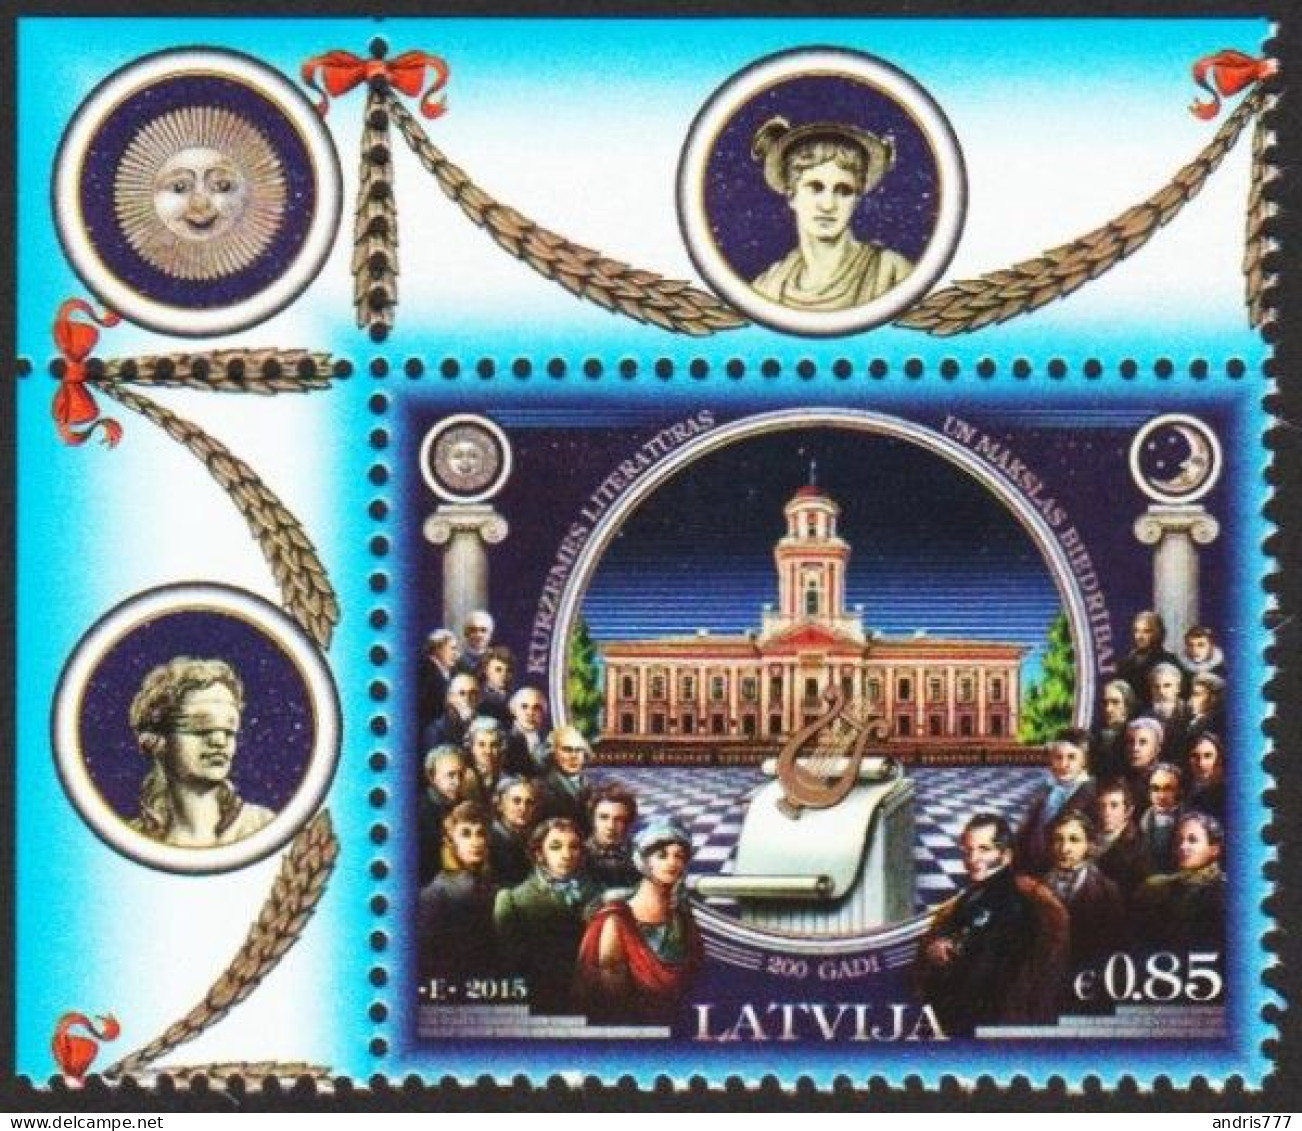 Latvia Lettland Lettonie 2015 (09) Courland Society For Literature And Art - 200 Years (corner) - Lettonia